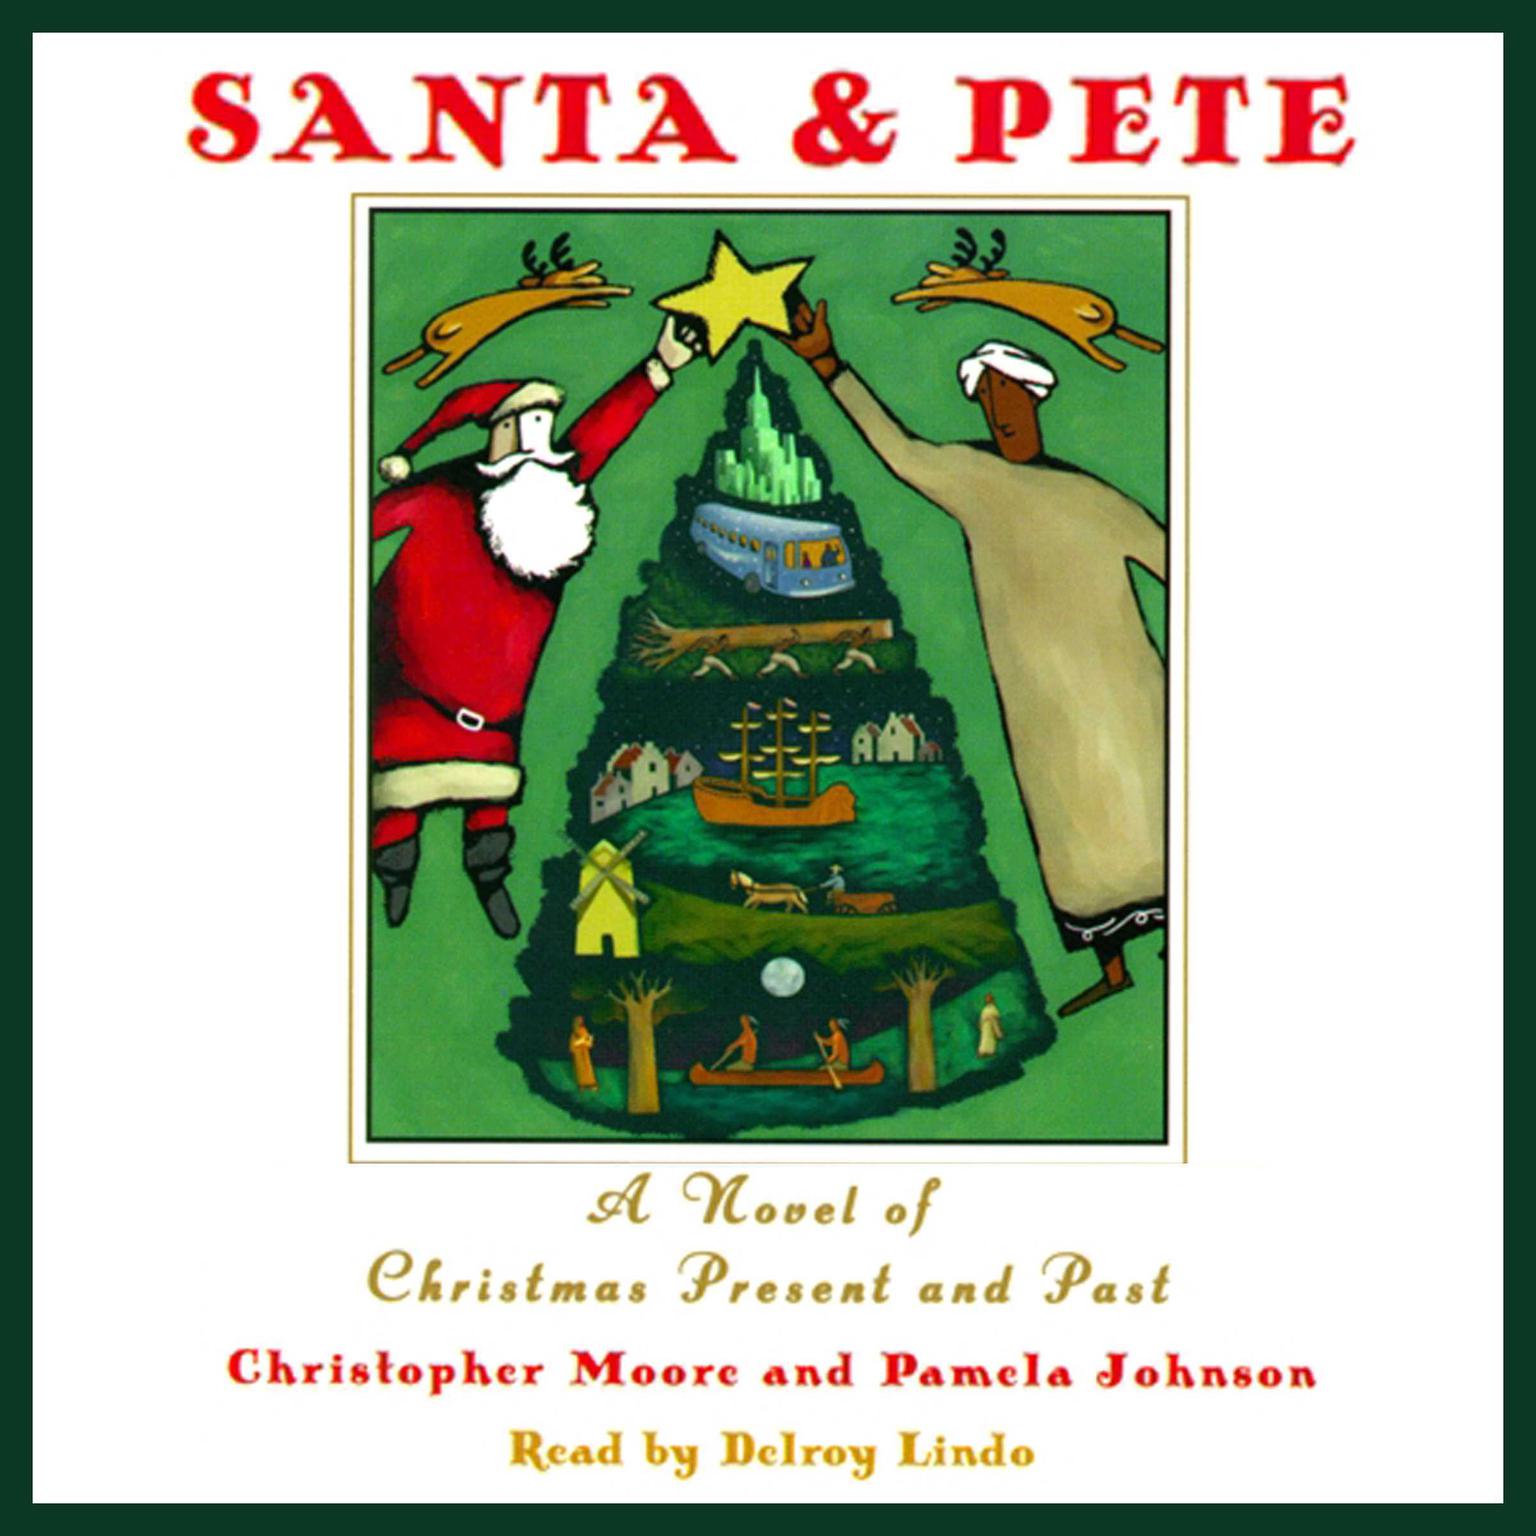 Santa & Pete (Abridged): A Novel of Christmas Present and Past Audiobook, by Christopher Moore